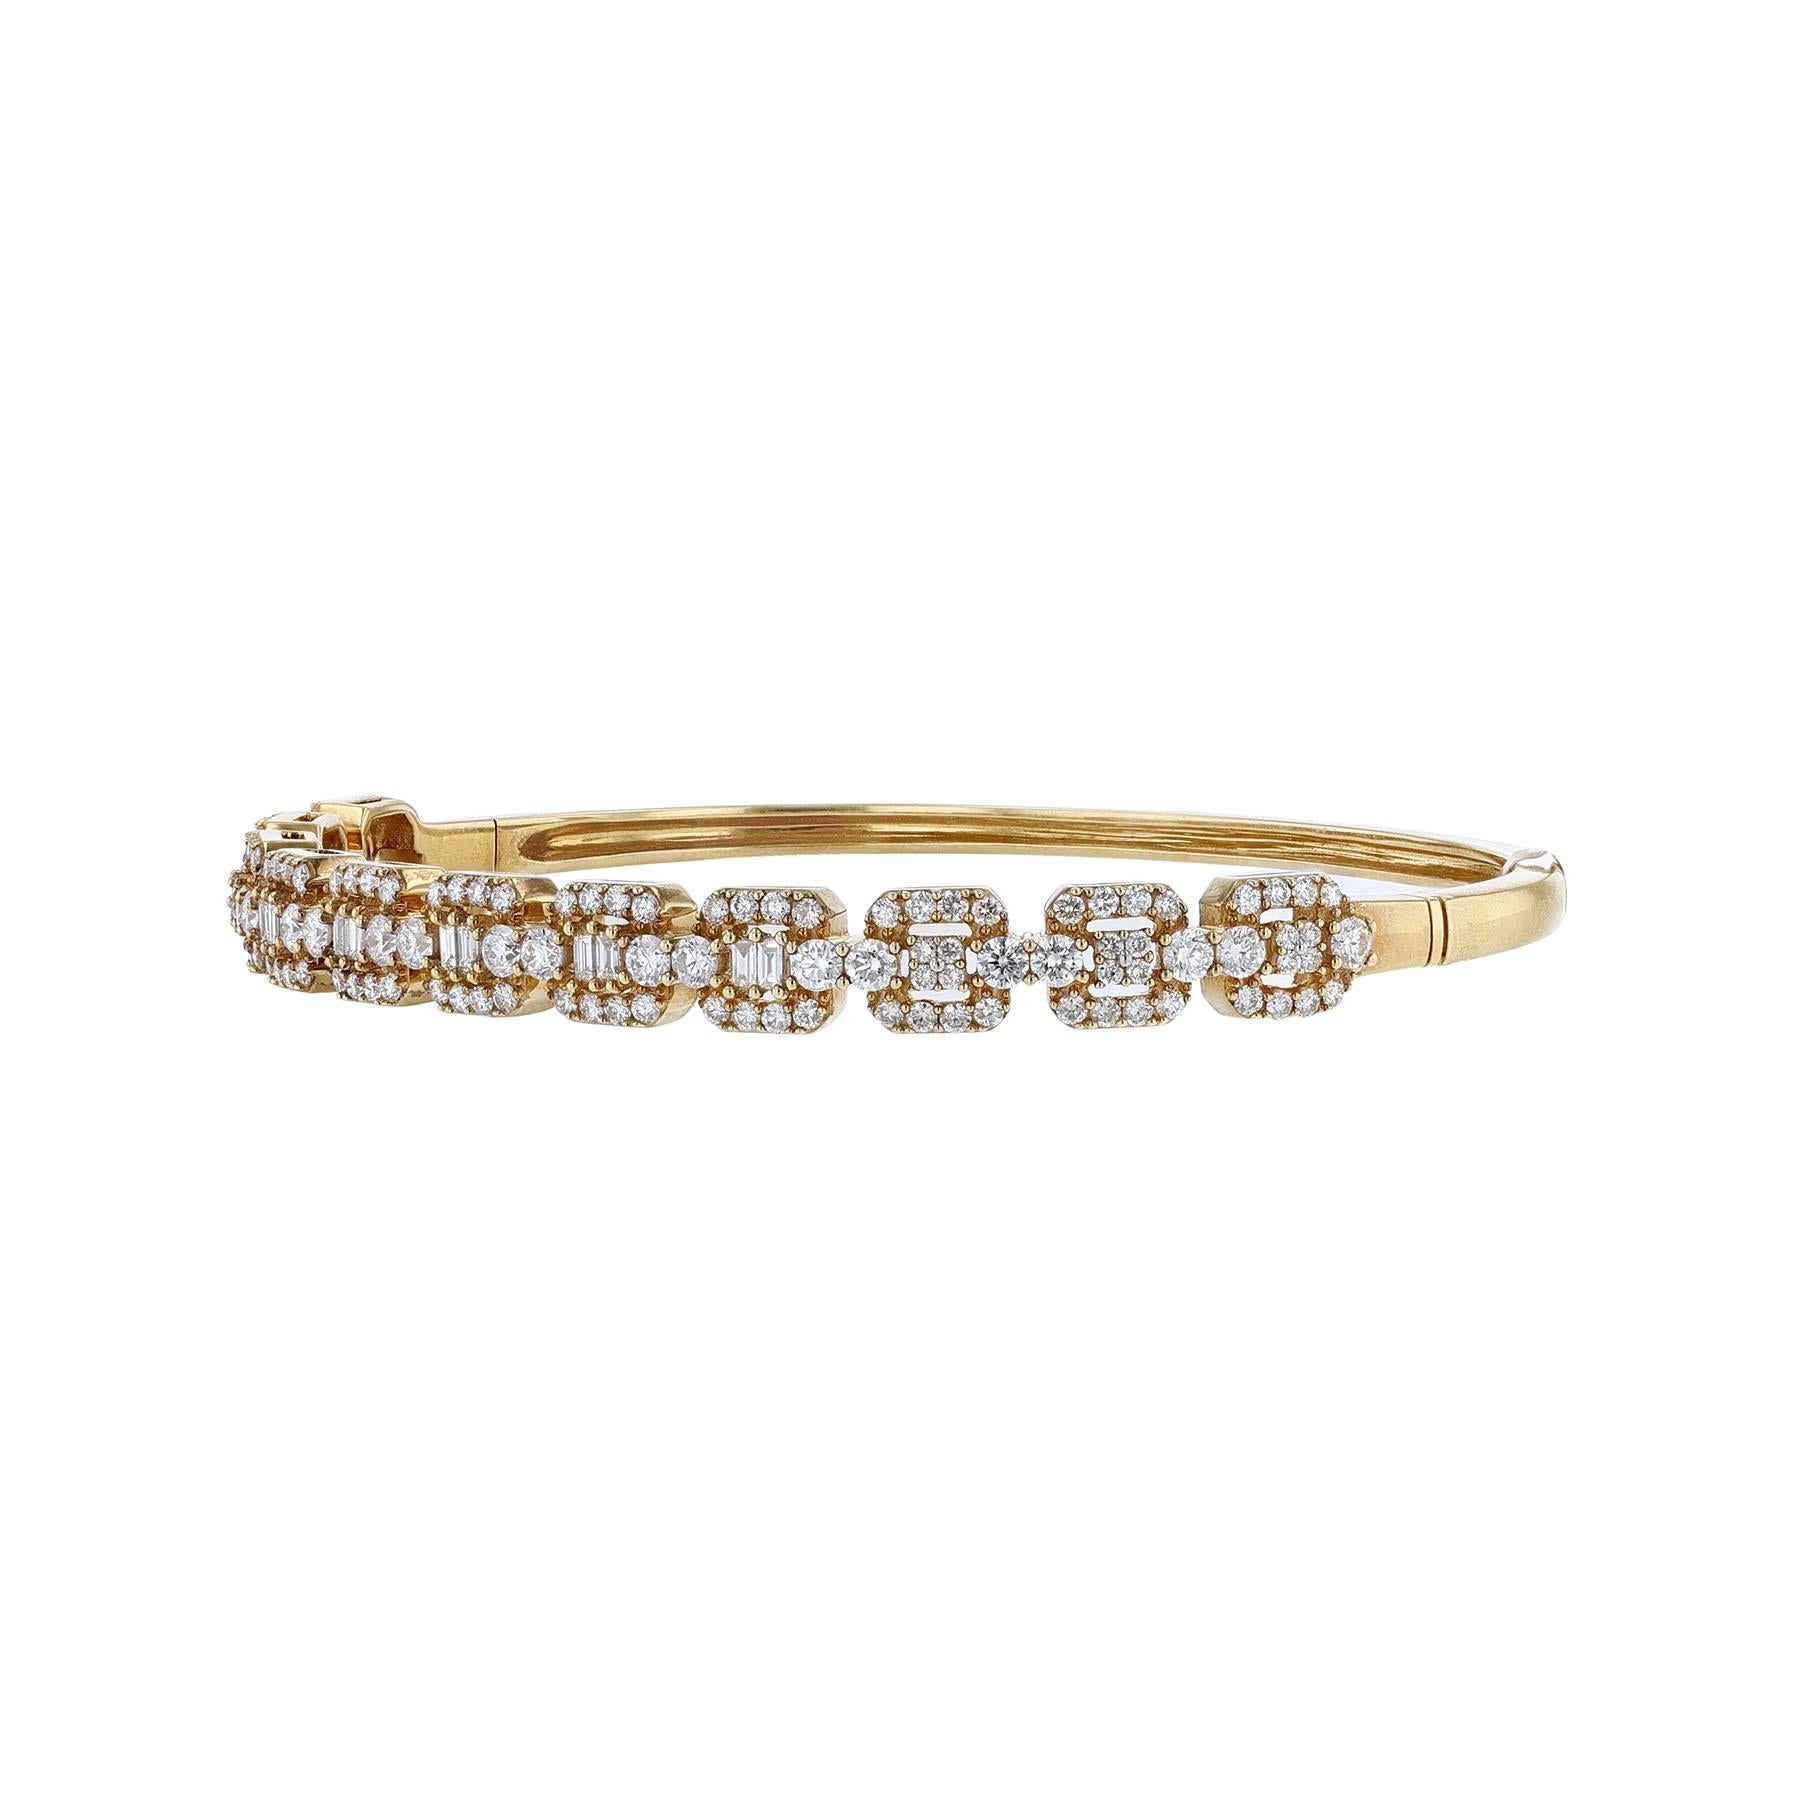 This bangle is made in 18K yellow gold. Features 11 cushion bezels with 134 round cut weighing 1.94ct. and 10 tapered baguette cut diamonds weighing 0.19ct. All stones are prong set. This bangle has a color grade (H) and a clarity grade of (SI2).
